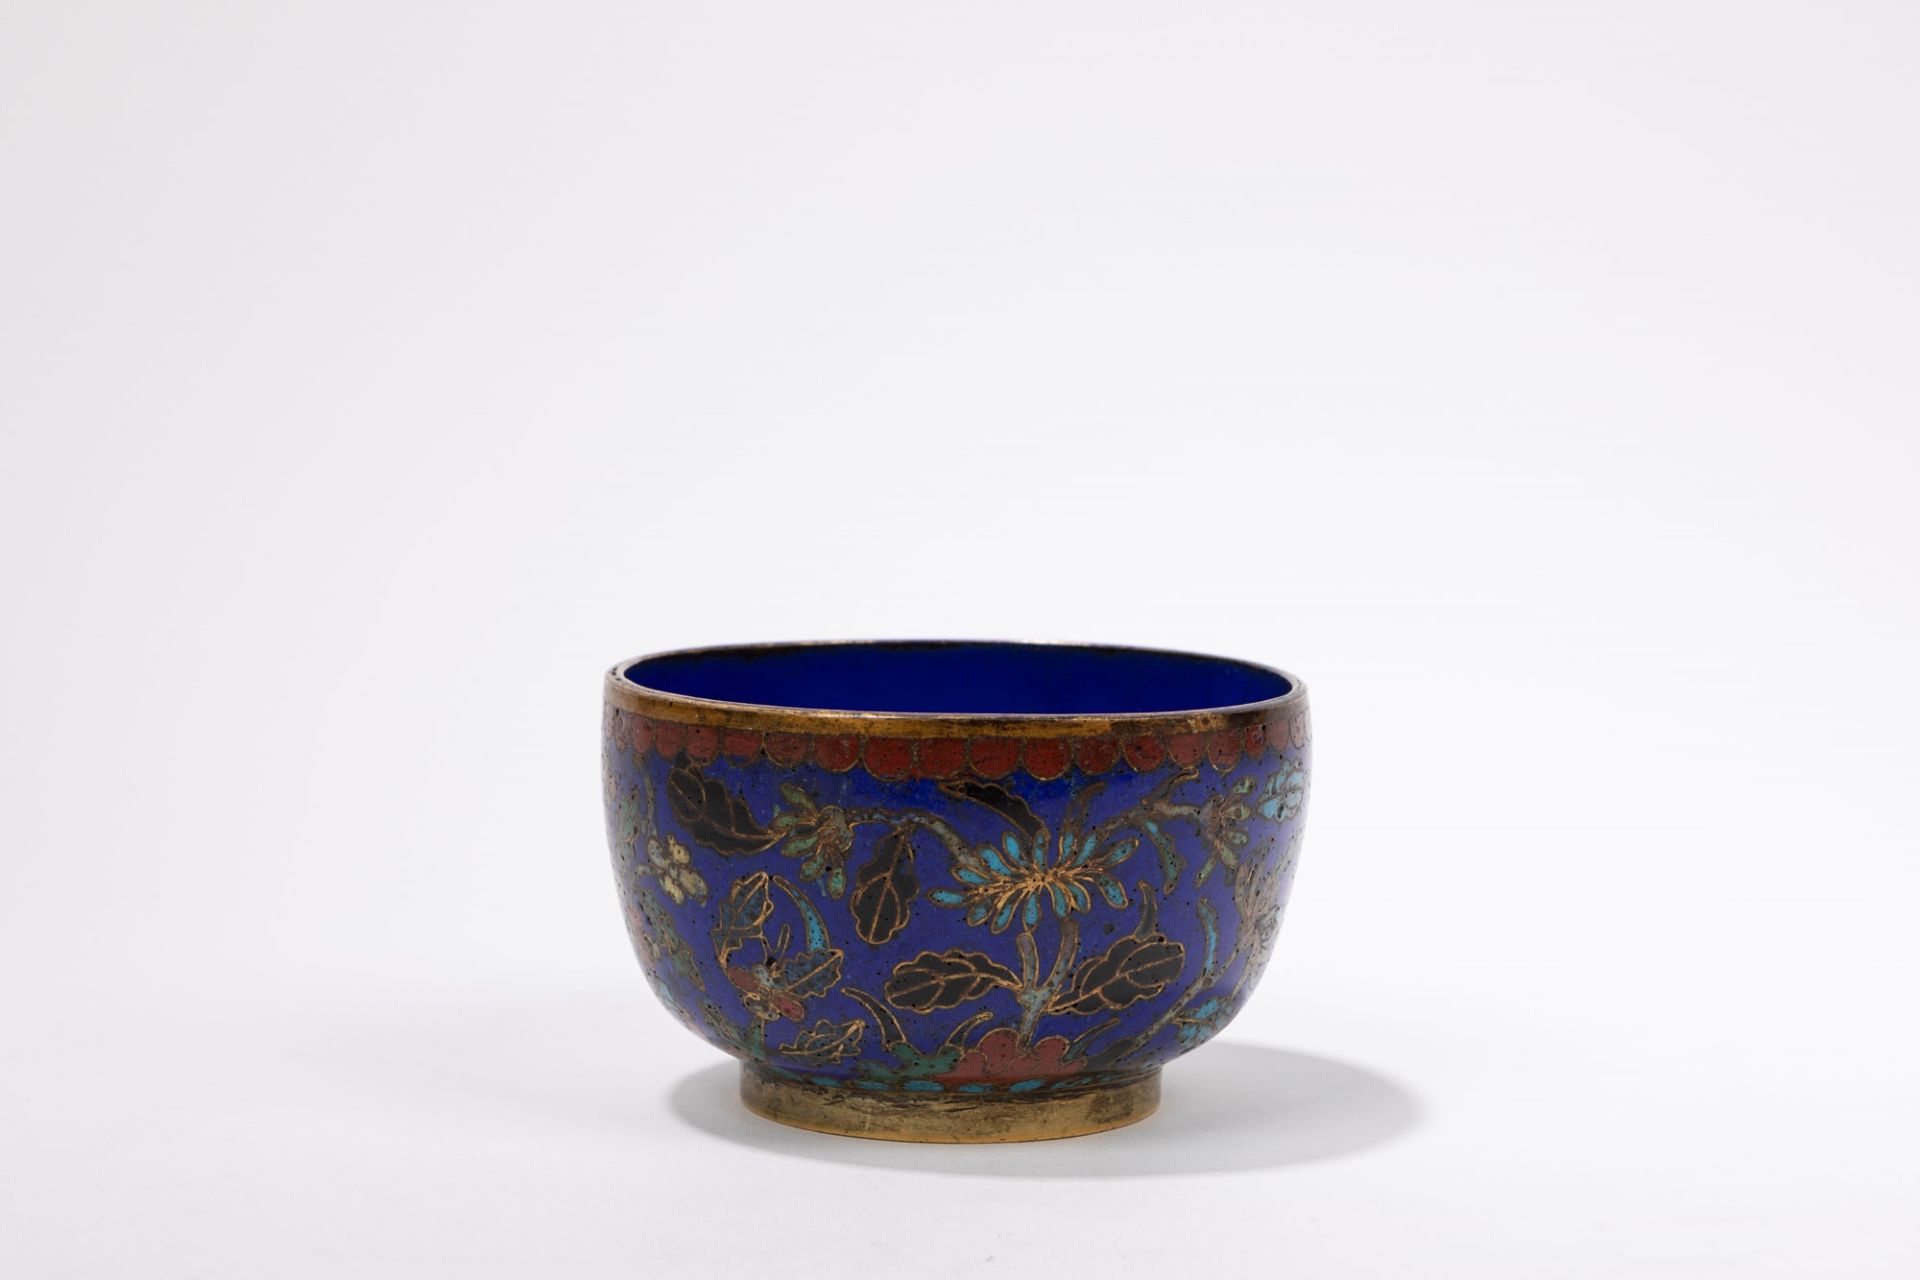 A CLOISONNE CUP, China, 17th / 18th century